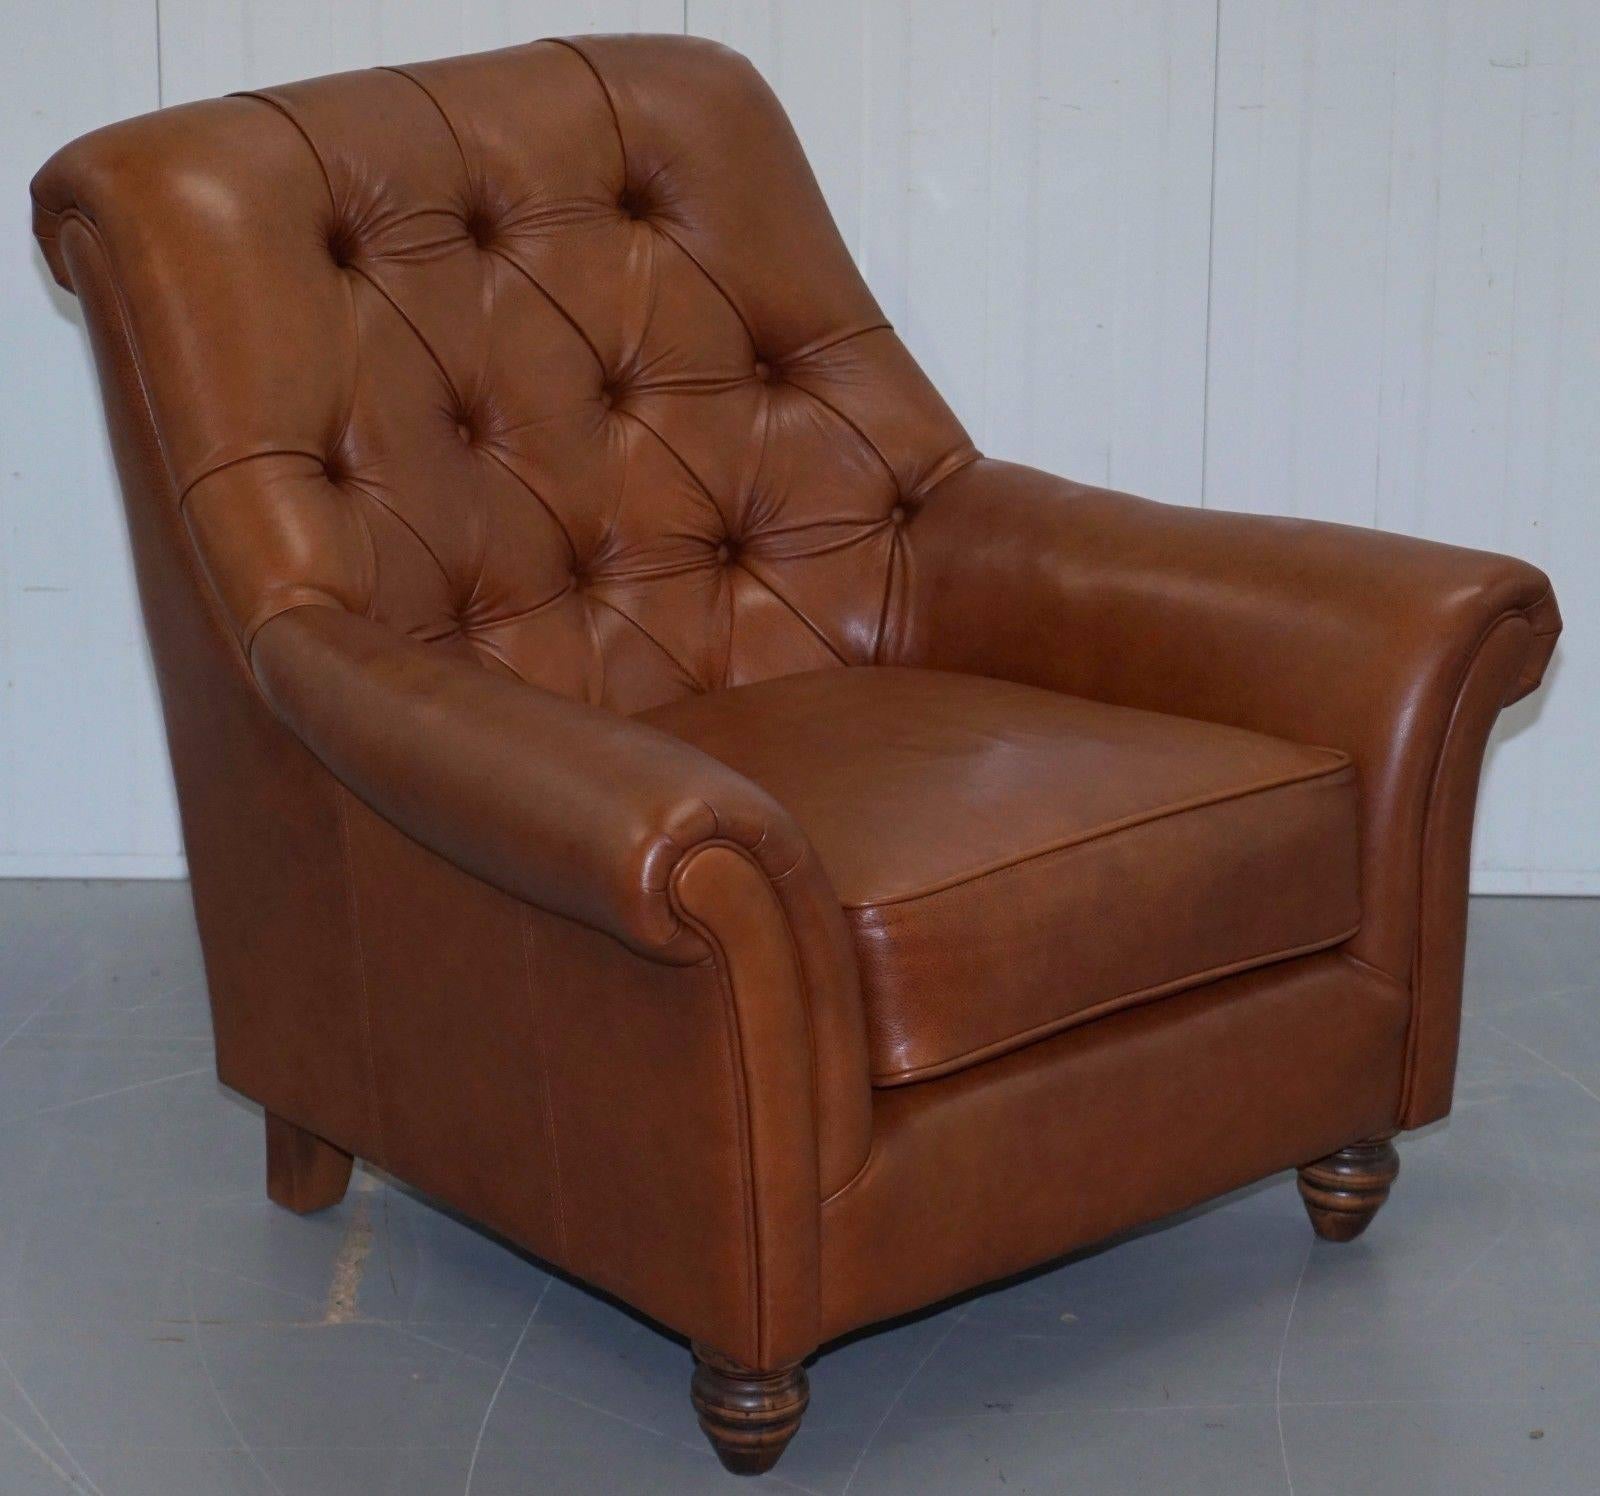 Wimbledon-Furniture

Wimbledon-Furniture is delighted to offer for sell this lovely pair of brand new Thomas Lloyd Cambridge Chesterfield brown leather sofa armchair suite RRP £2528

Please note the delivery fee listed is just a guide, for an